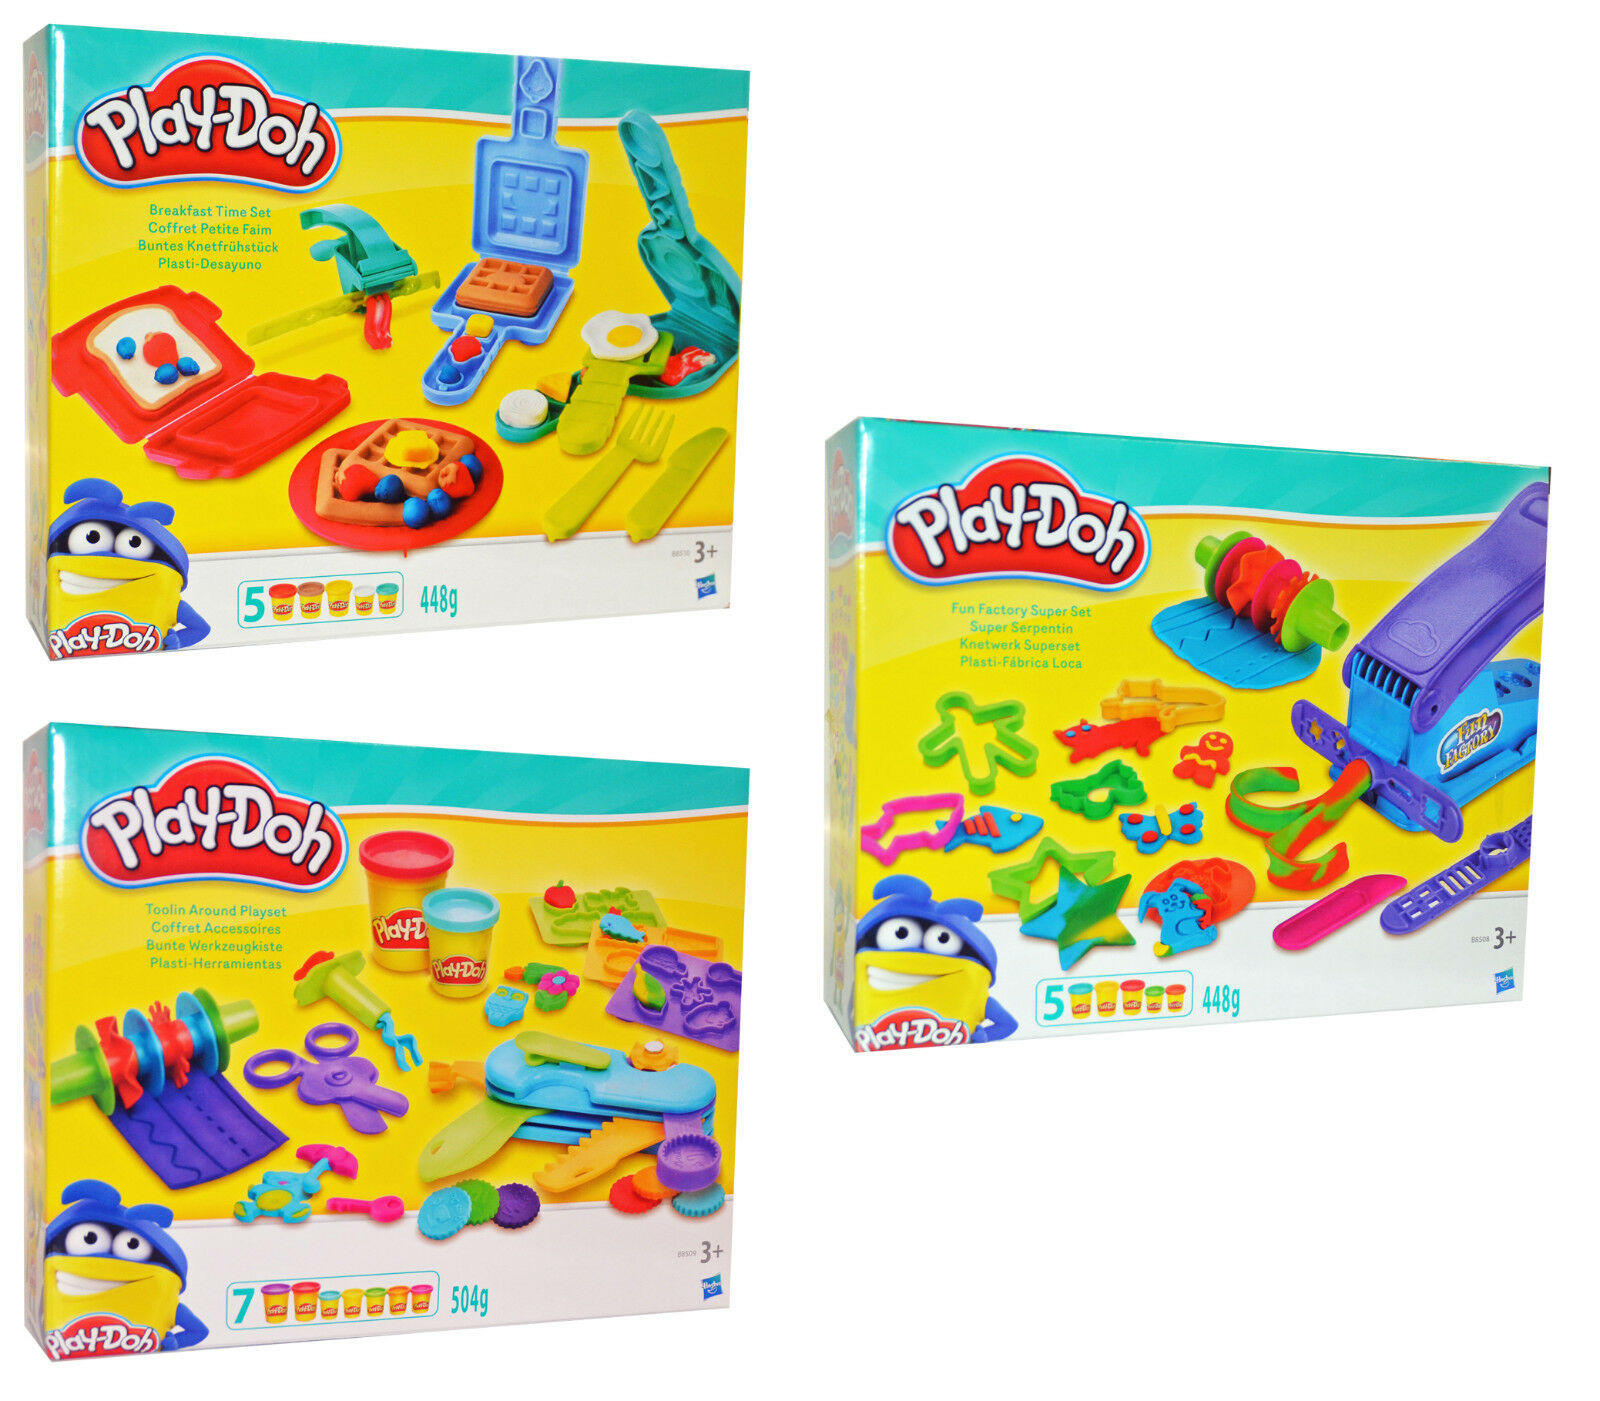 Read more about the article Lidls Play Doh Knetset im Test